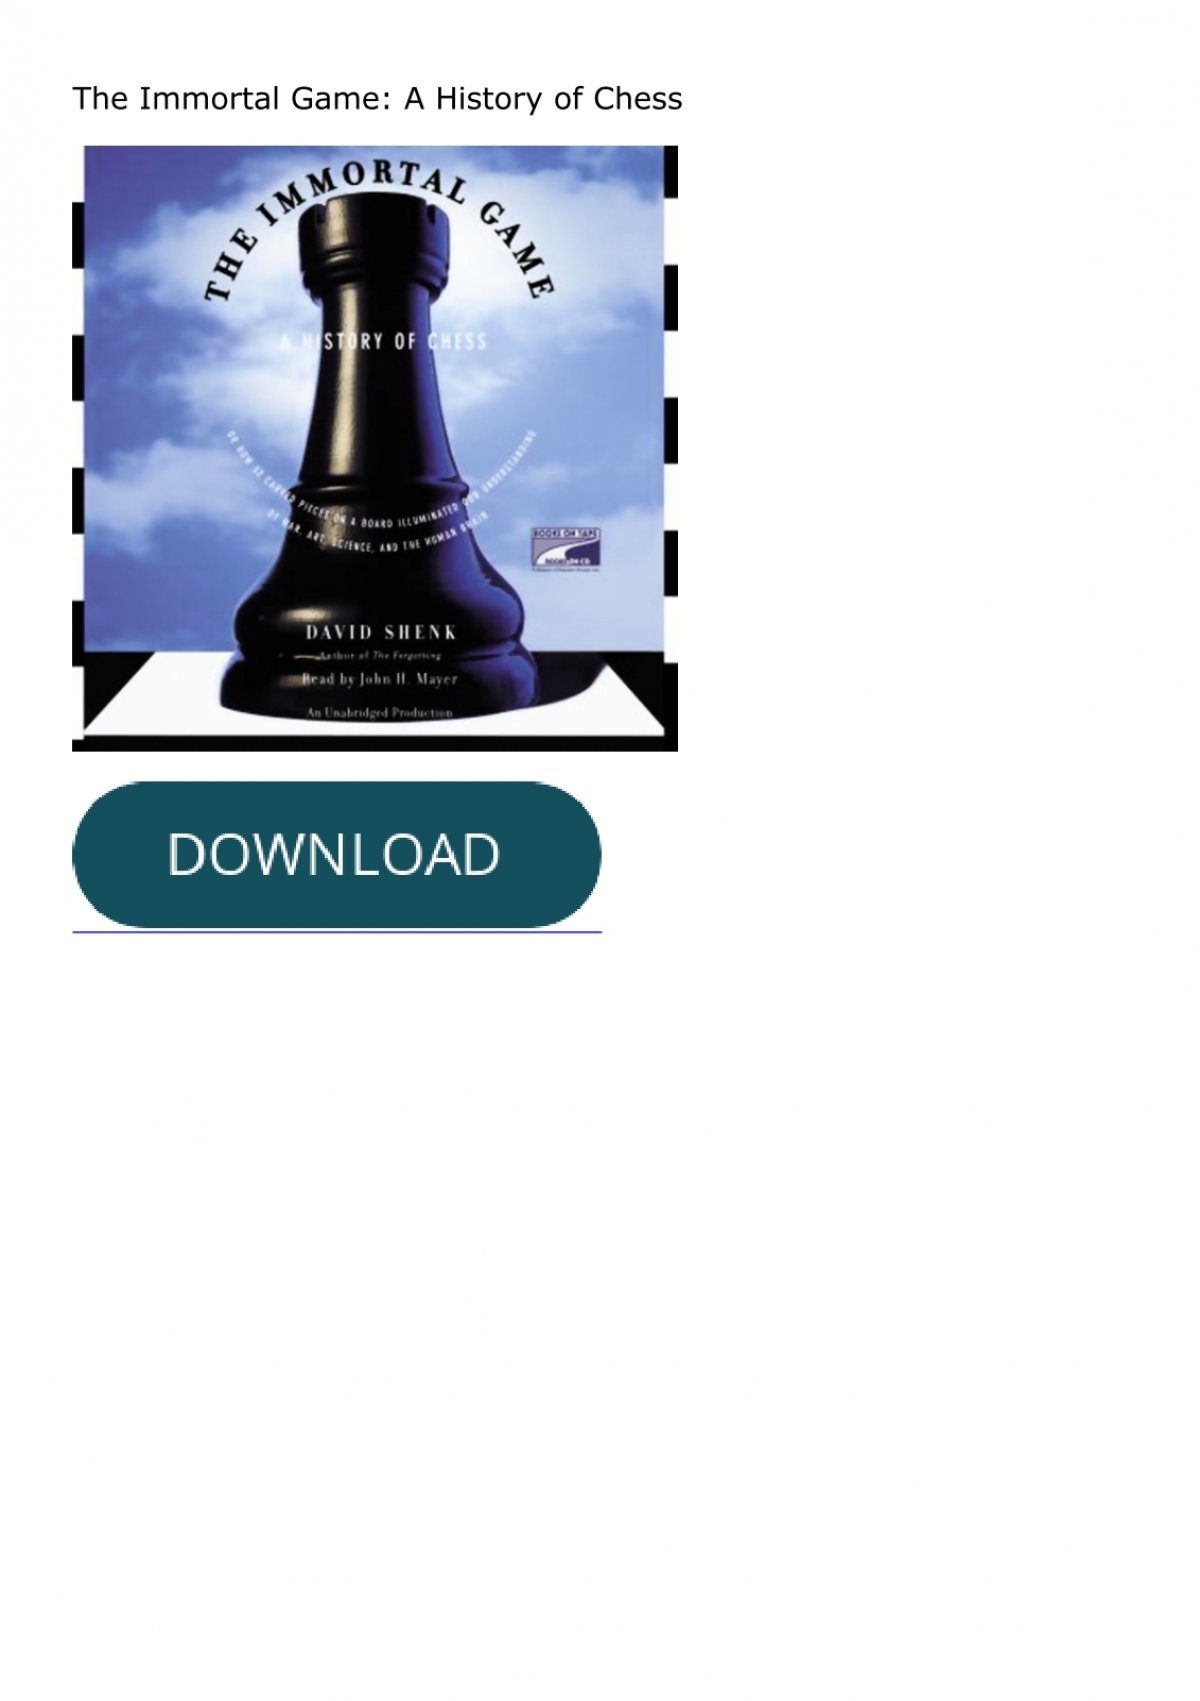 The Immortal Game: A History of Chess PDF Download